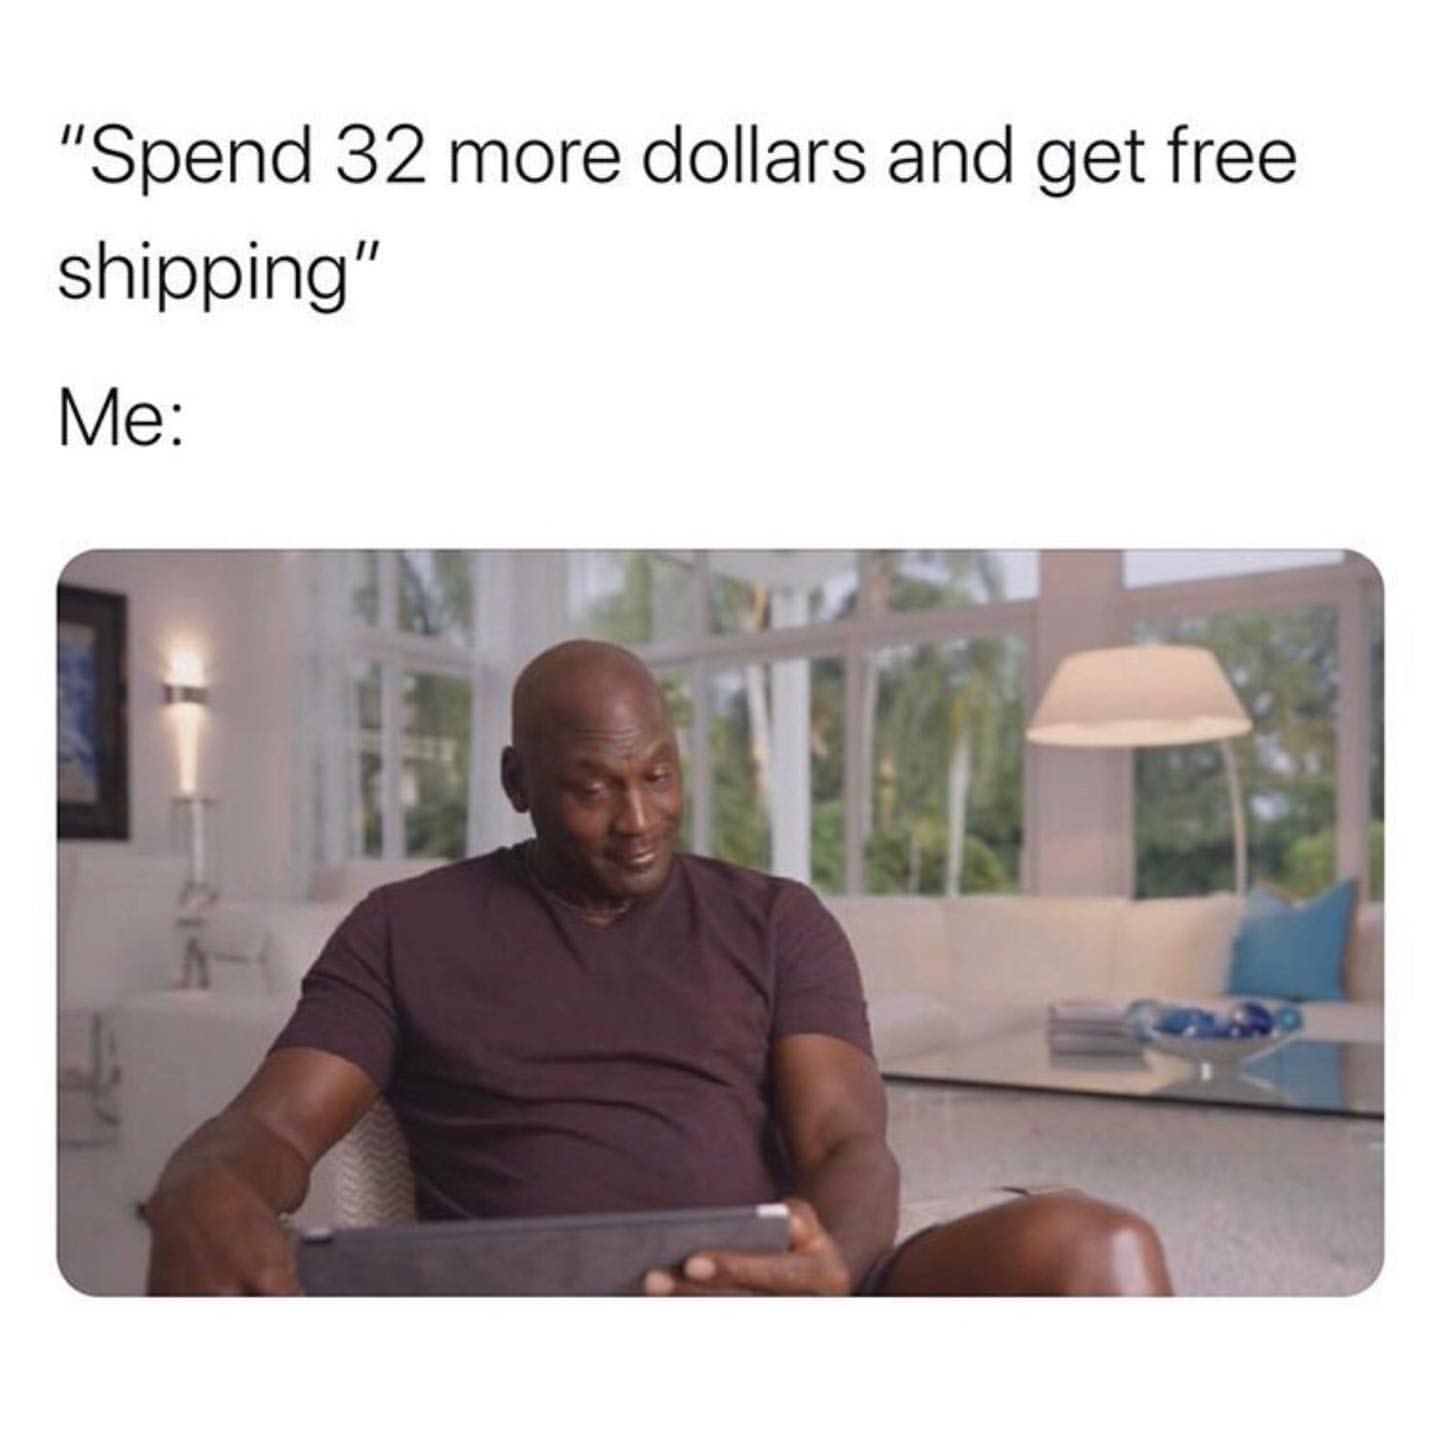 "Spend 32 more dollars and get free shipping". Me: